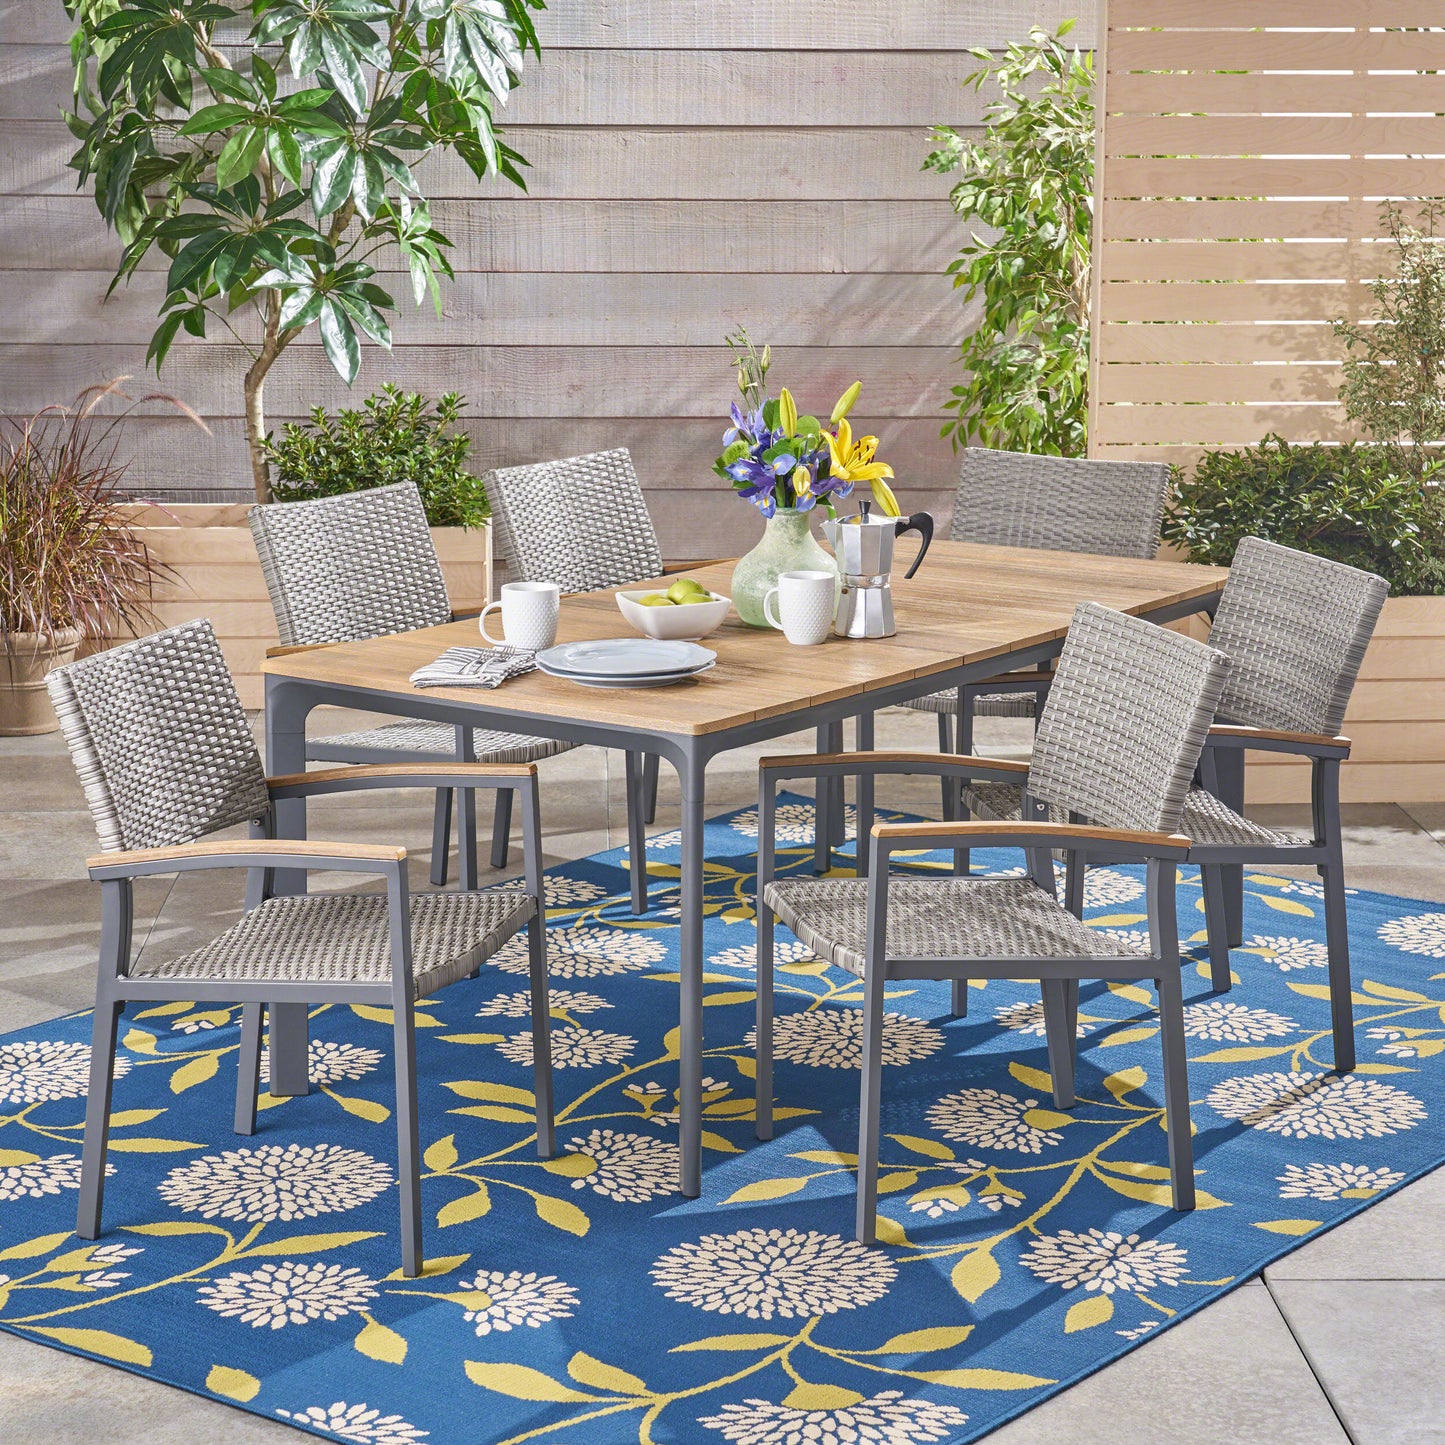 Huxley Outdoor Aluminum 7 Piece Dining Set with Wood Tabletop